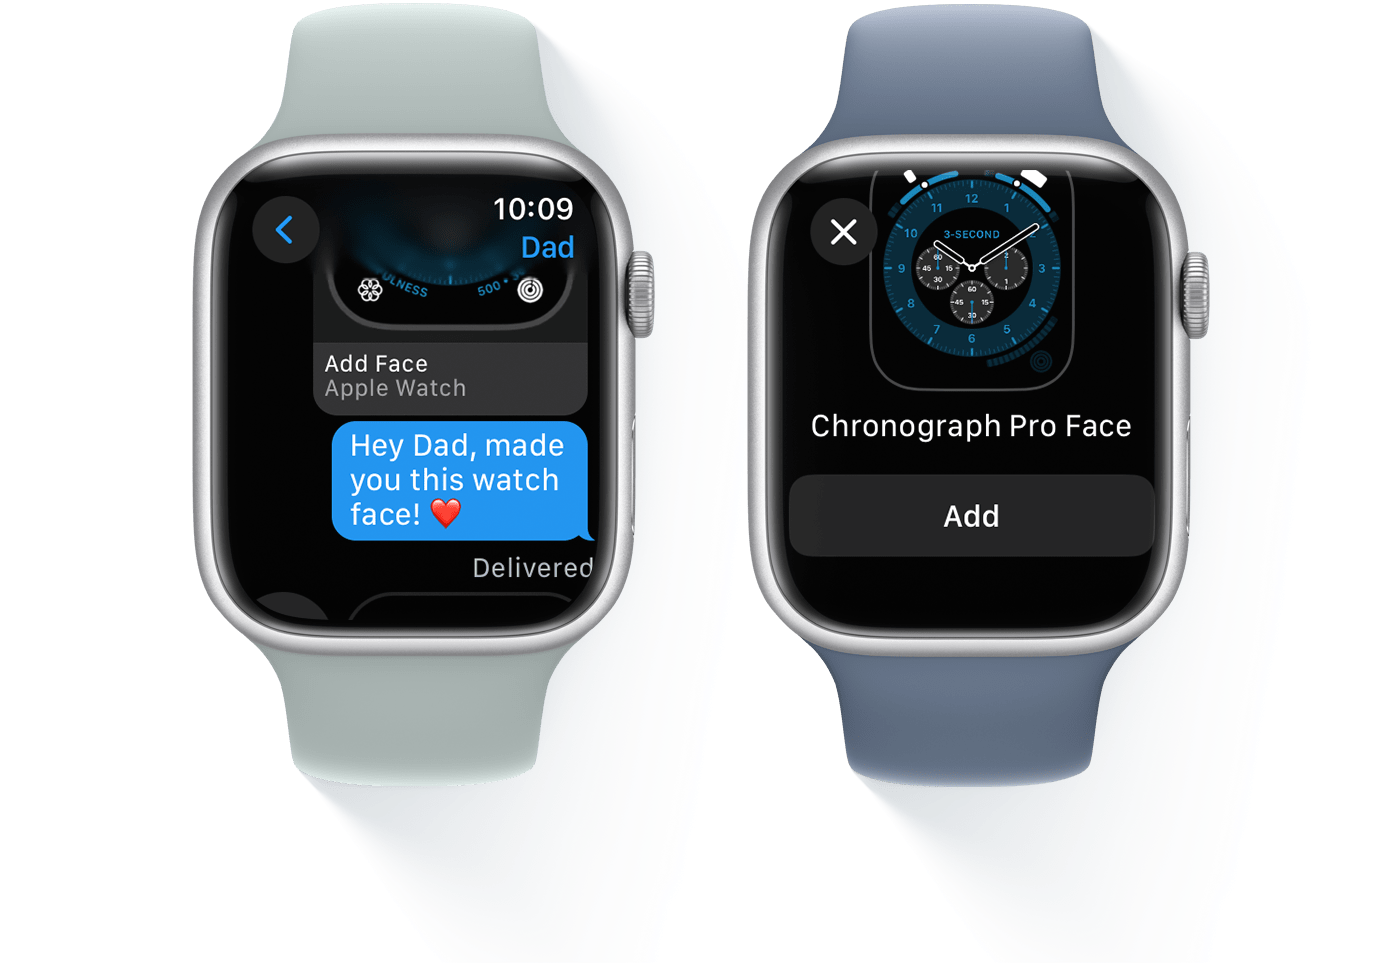 Two Apple Watches, one showing a text message conversation and the other showing Chronograph Pro Face